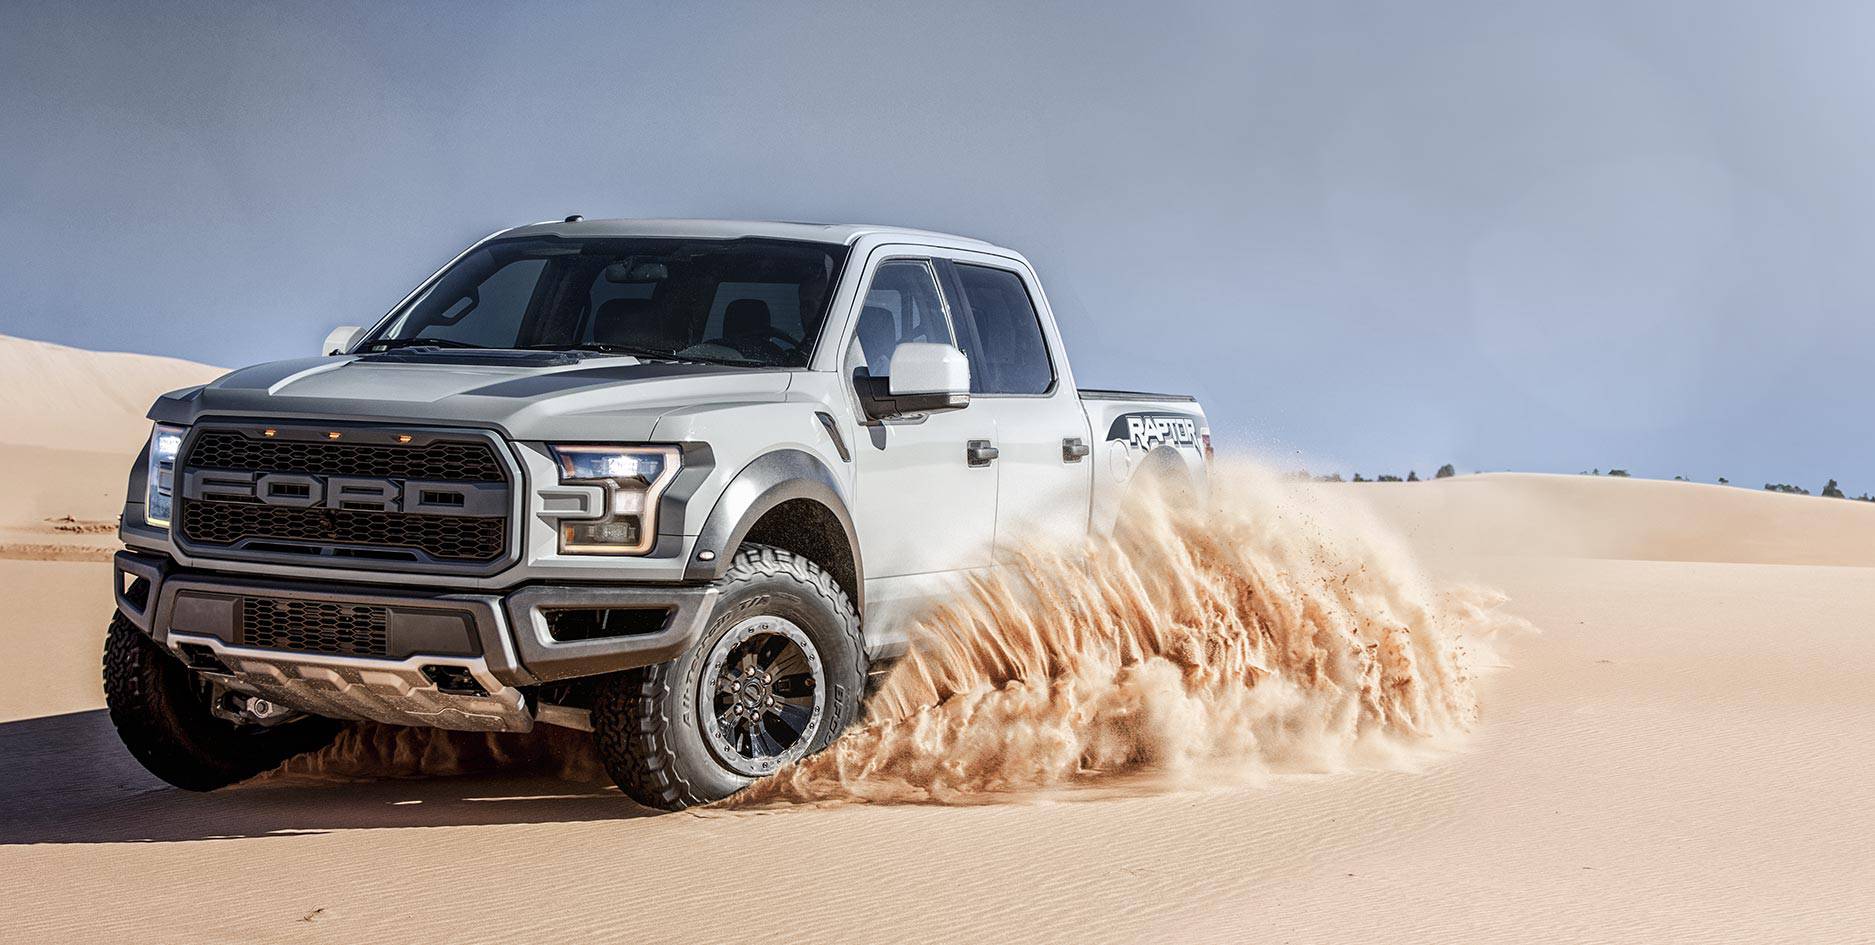 A white Ford F-150 truck driving through the desert.